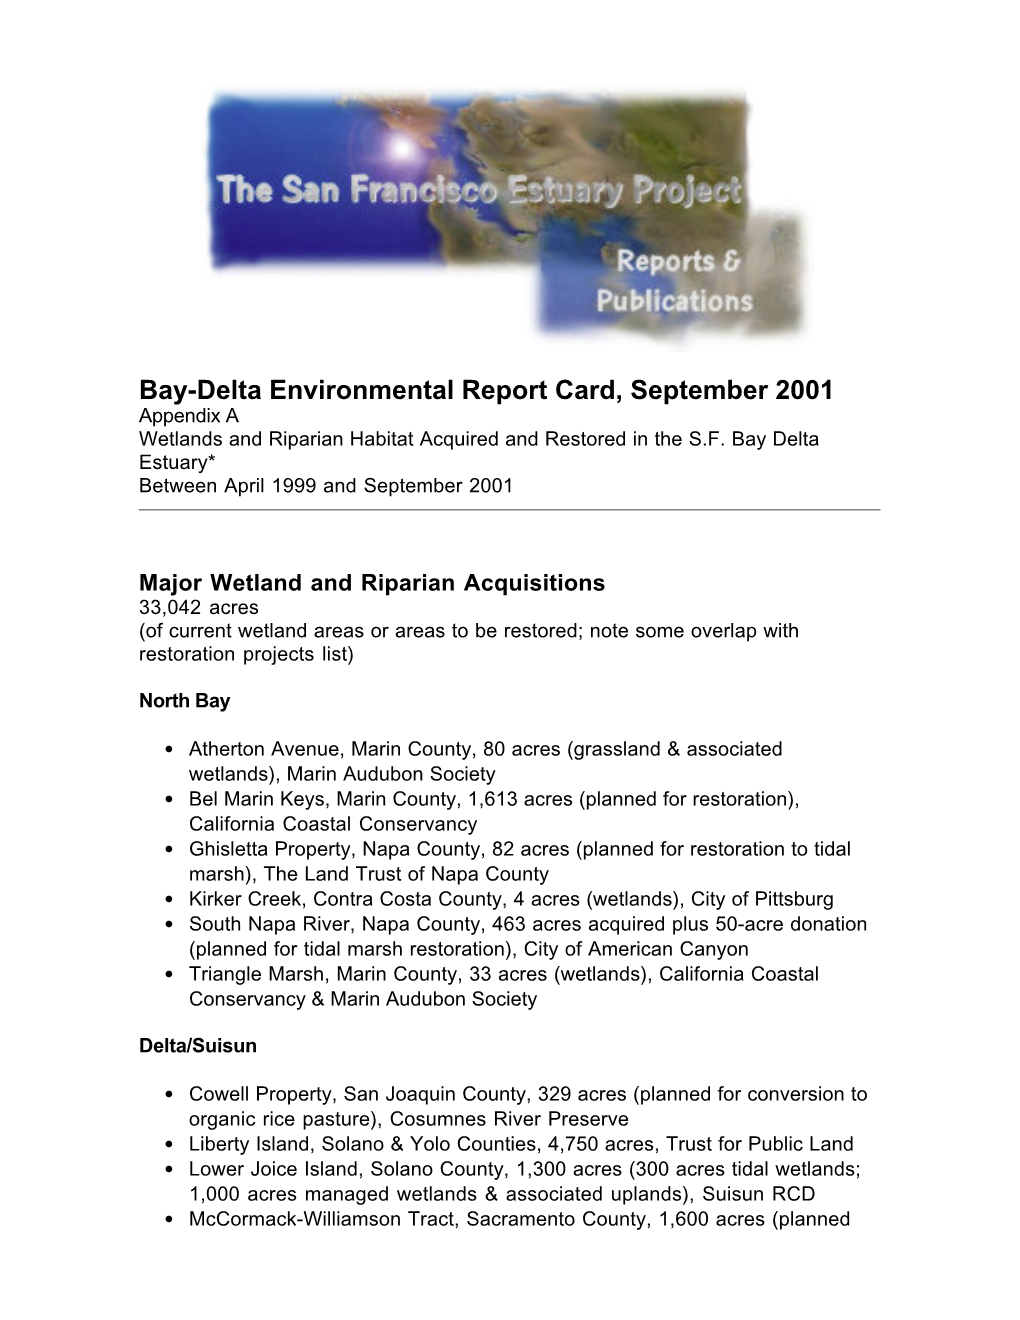 Bay-Delta Environmental Report Card, September 2001 Appendix a Wetlands and Riparian Habitat Acquired and Restored in the S.F